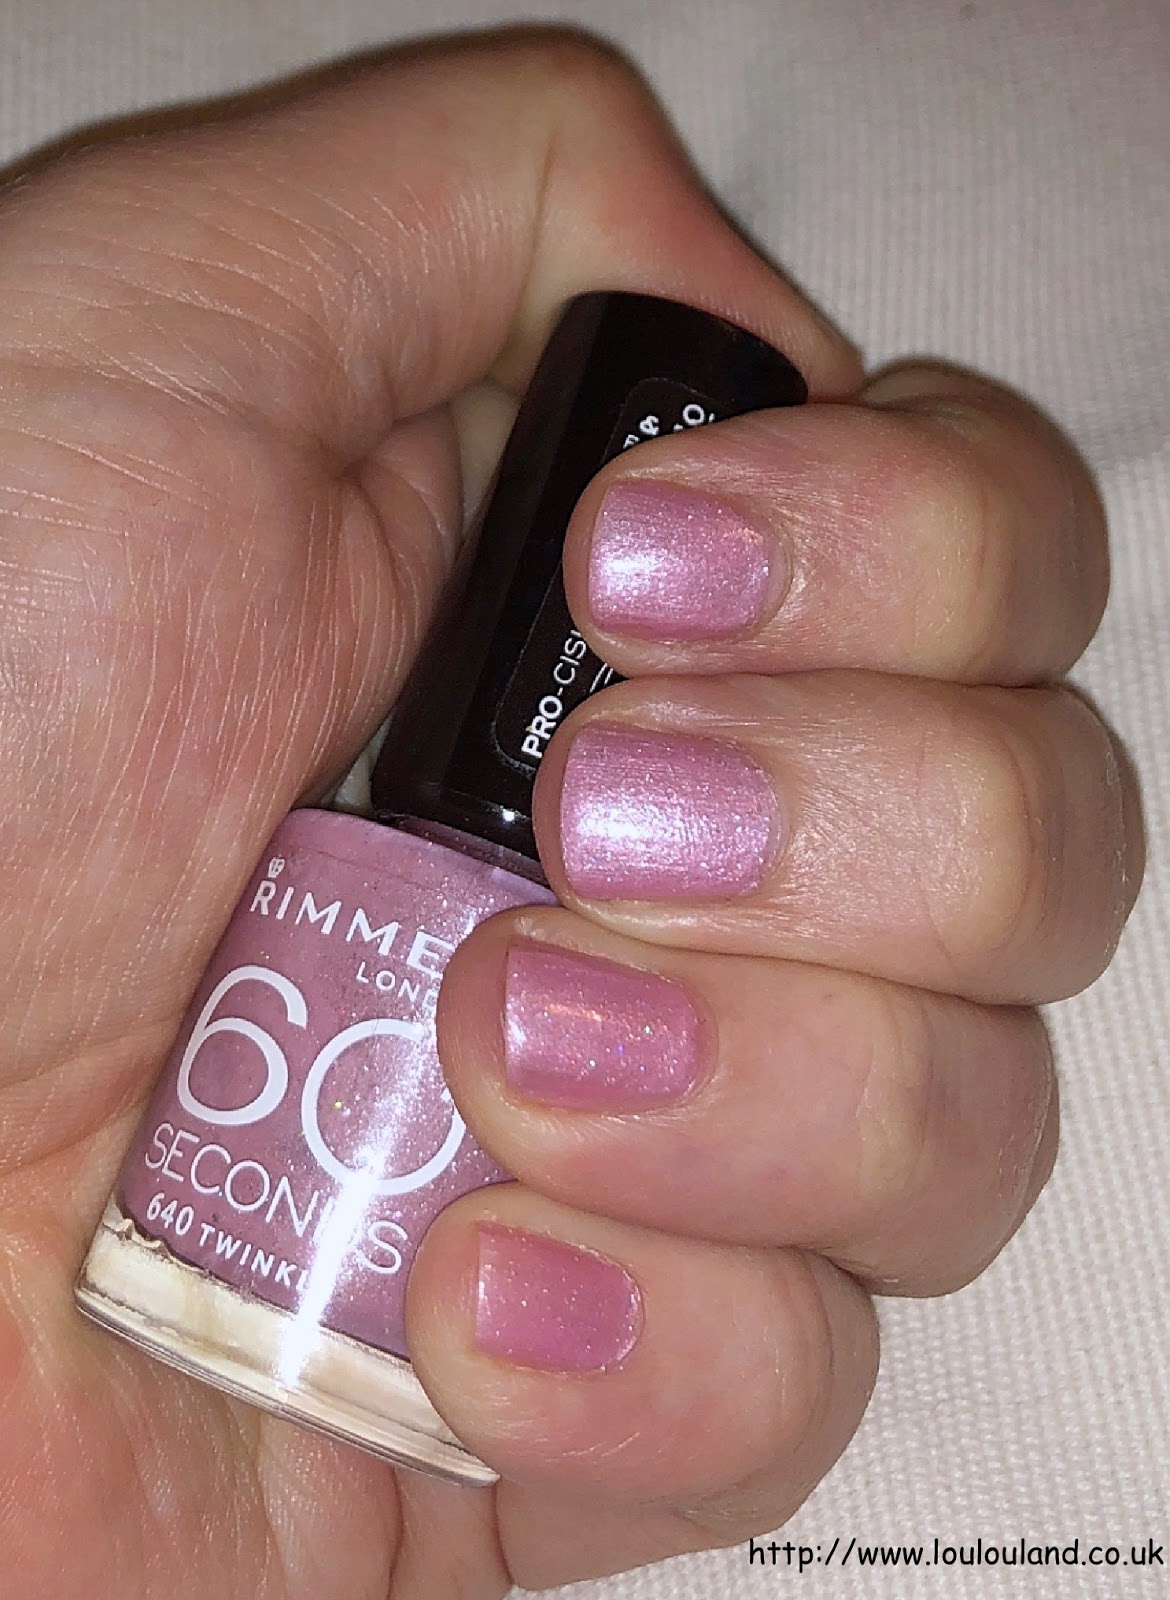 LouLouLand: A Blast From The Past - Rimmel 60 Seconds Nail Polish - 640  Twinkle